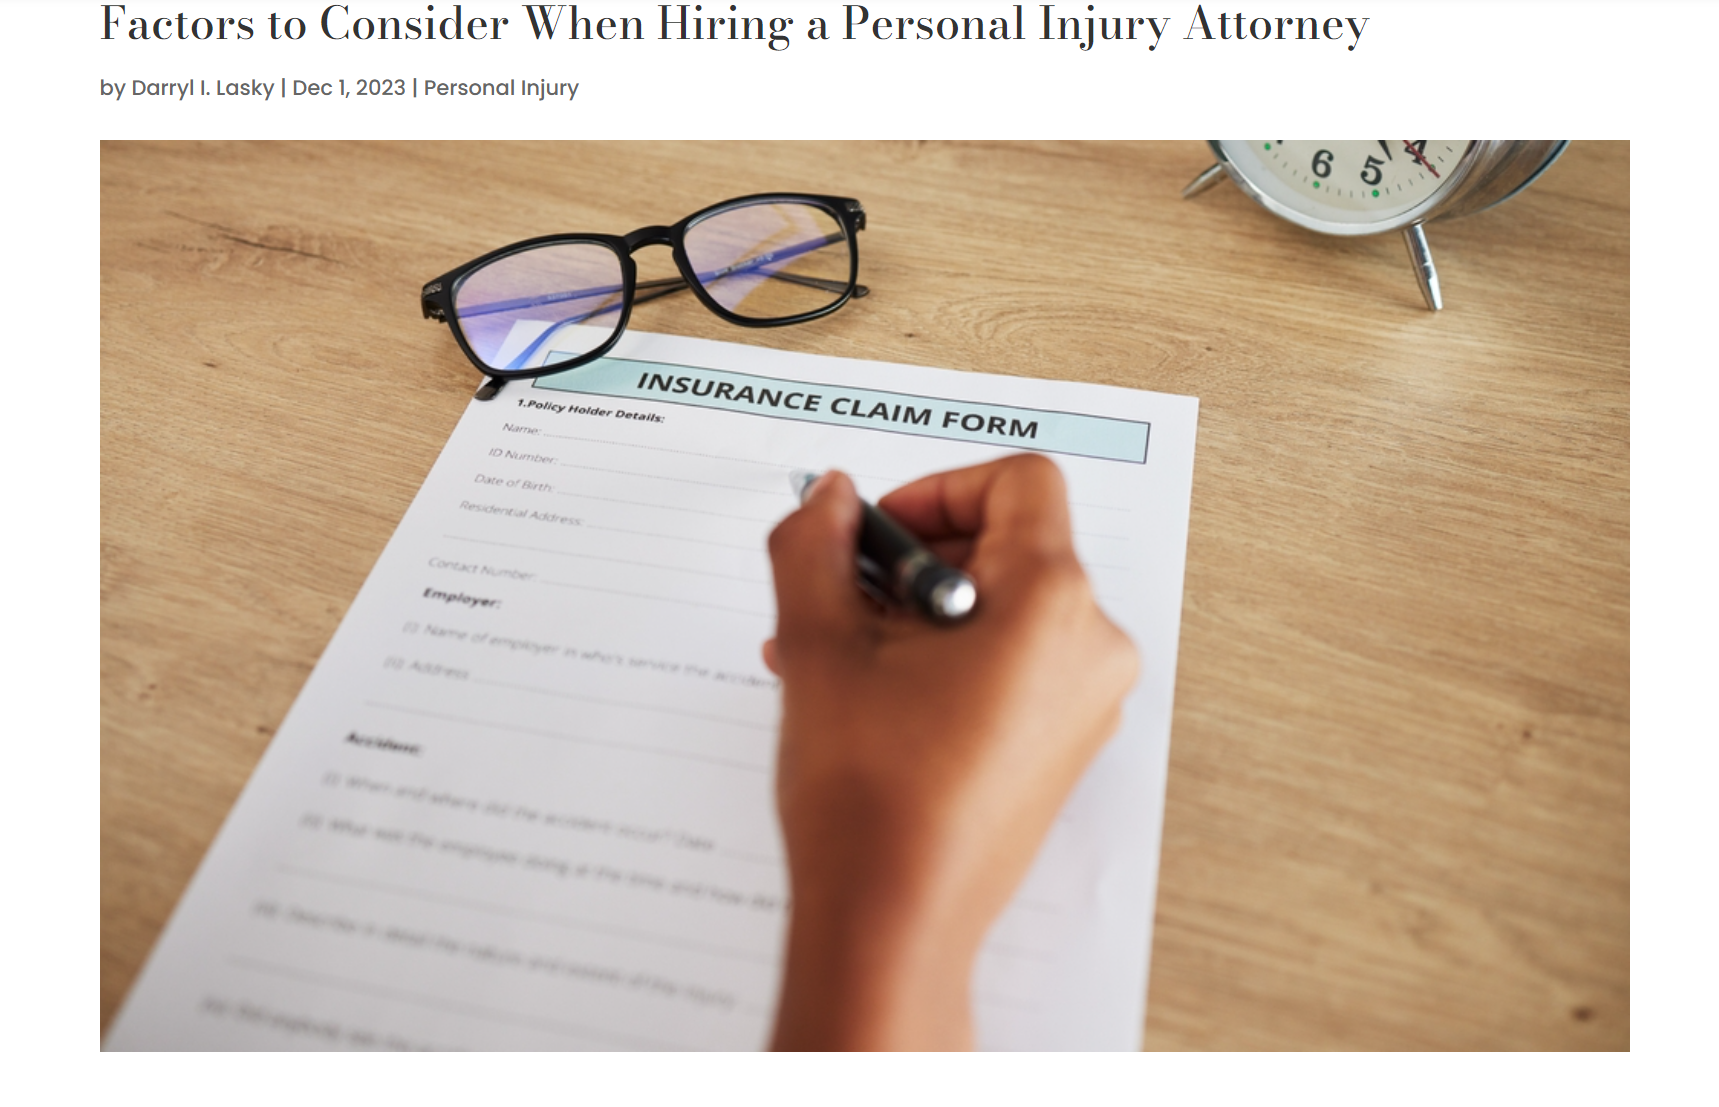 Factors to Consider When Hiring a Personal Injury Attorney